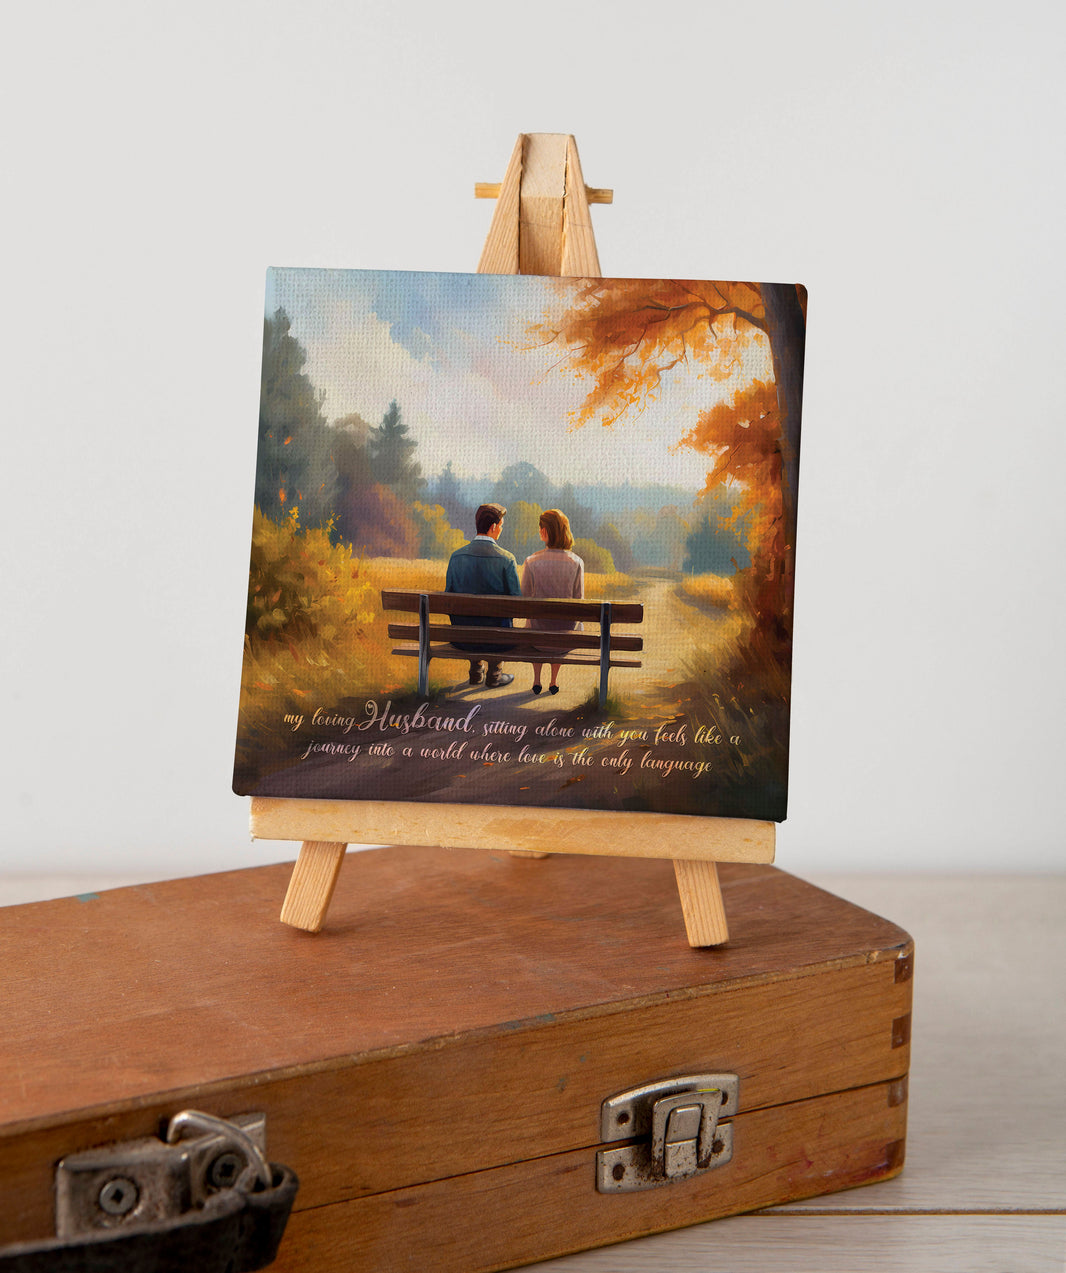 Make Memories Canvas Gift with a Beautiful Message for Husband